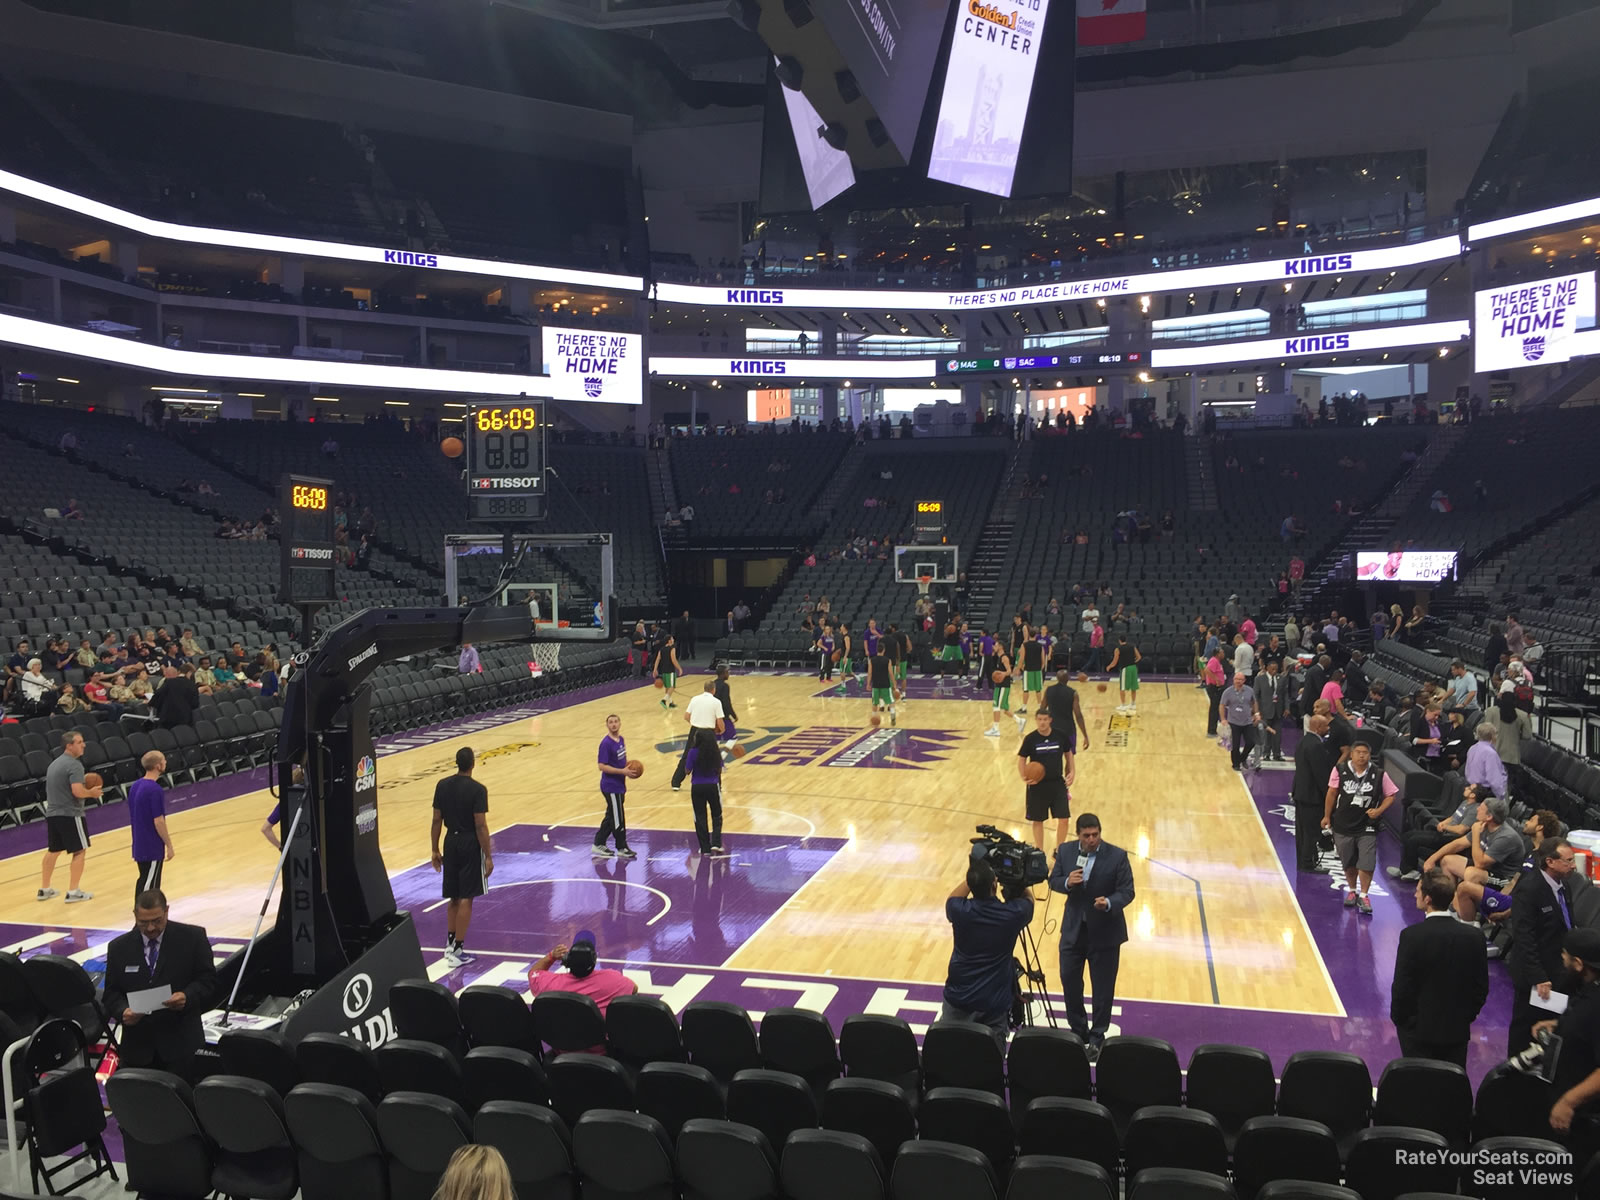 section 113, row dd seat view  for basketball - golden 1 center